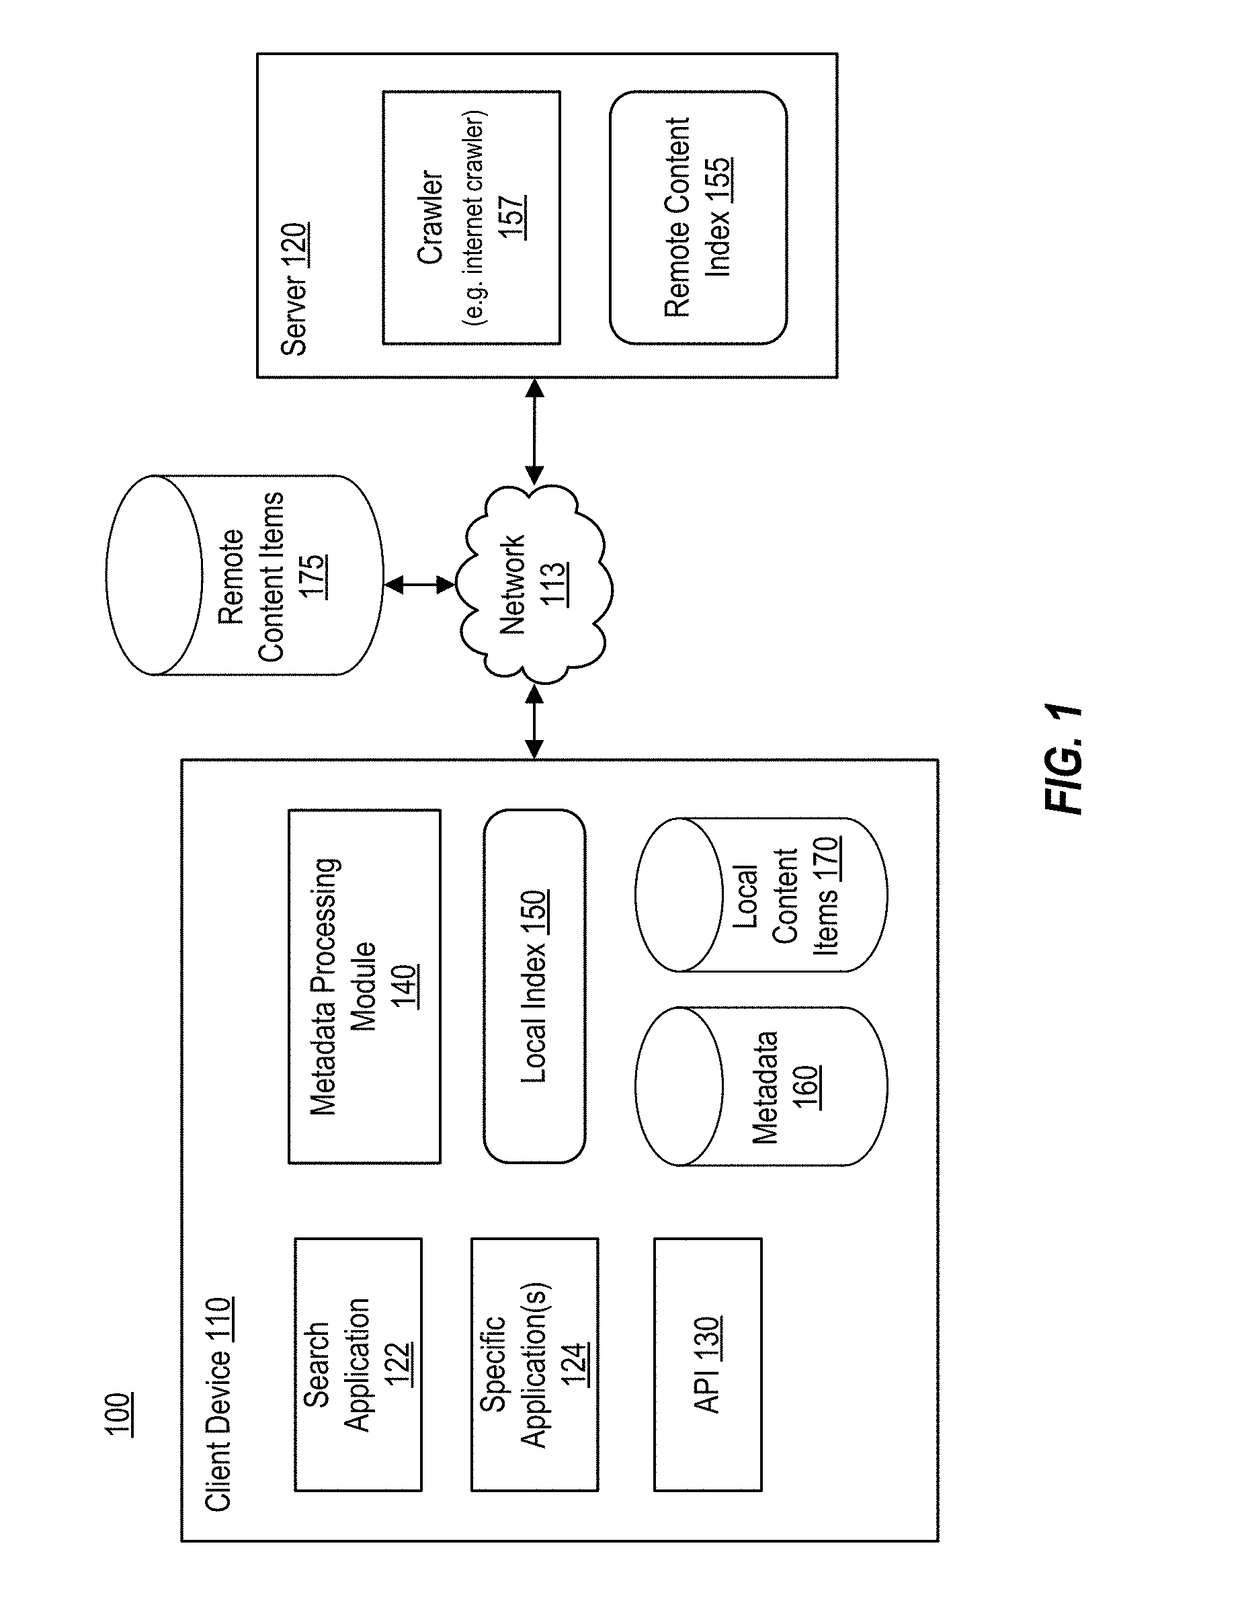 Providing an application specific extended search capability